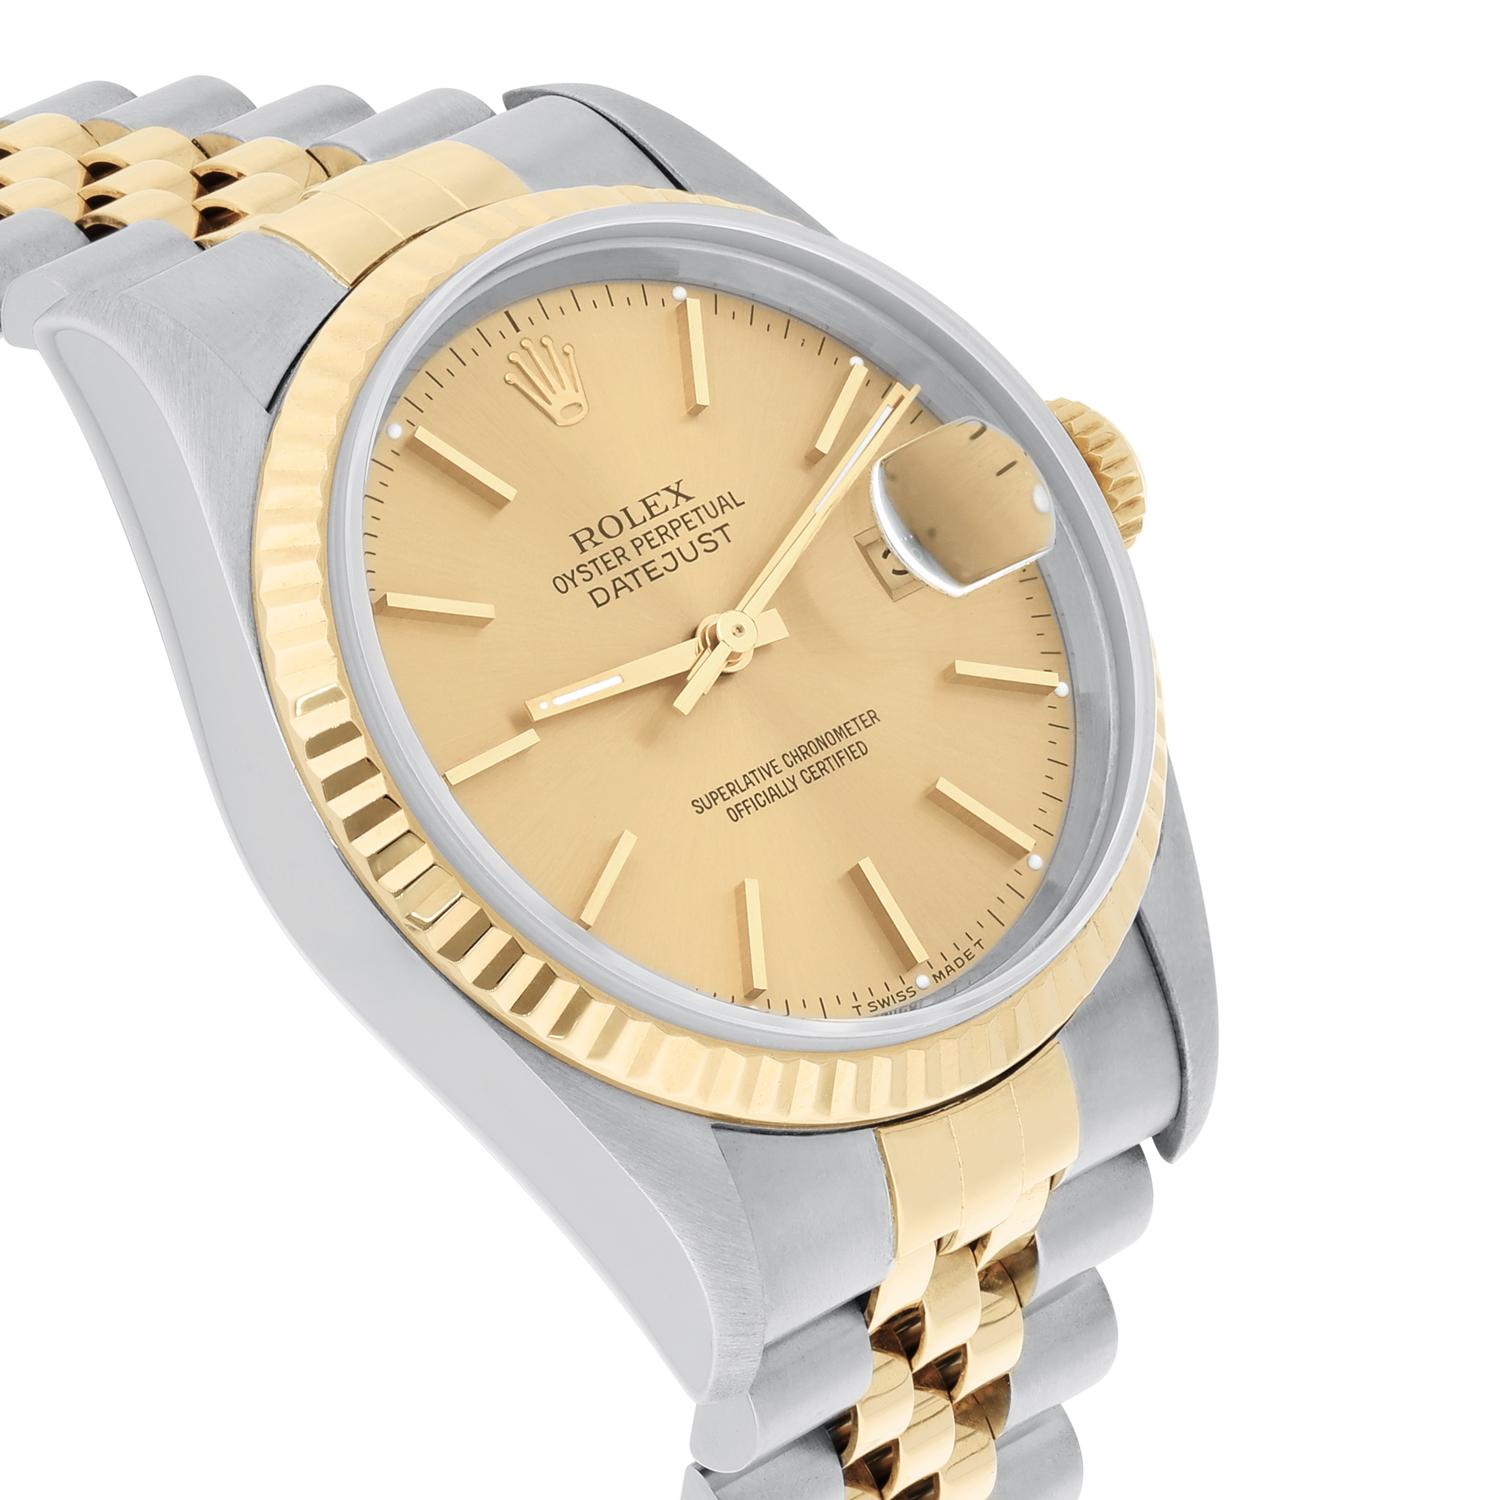 Women's or Men's Rolex Datejust 36 Two Tone Champagne Dial Jubilee Band 16233 Circa 1993 For Sale